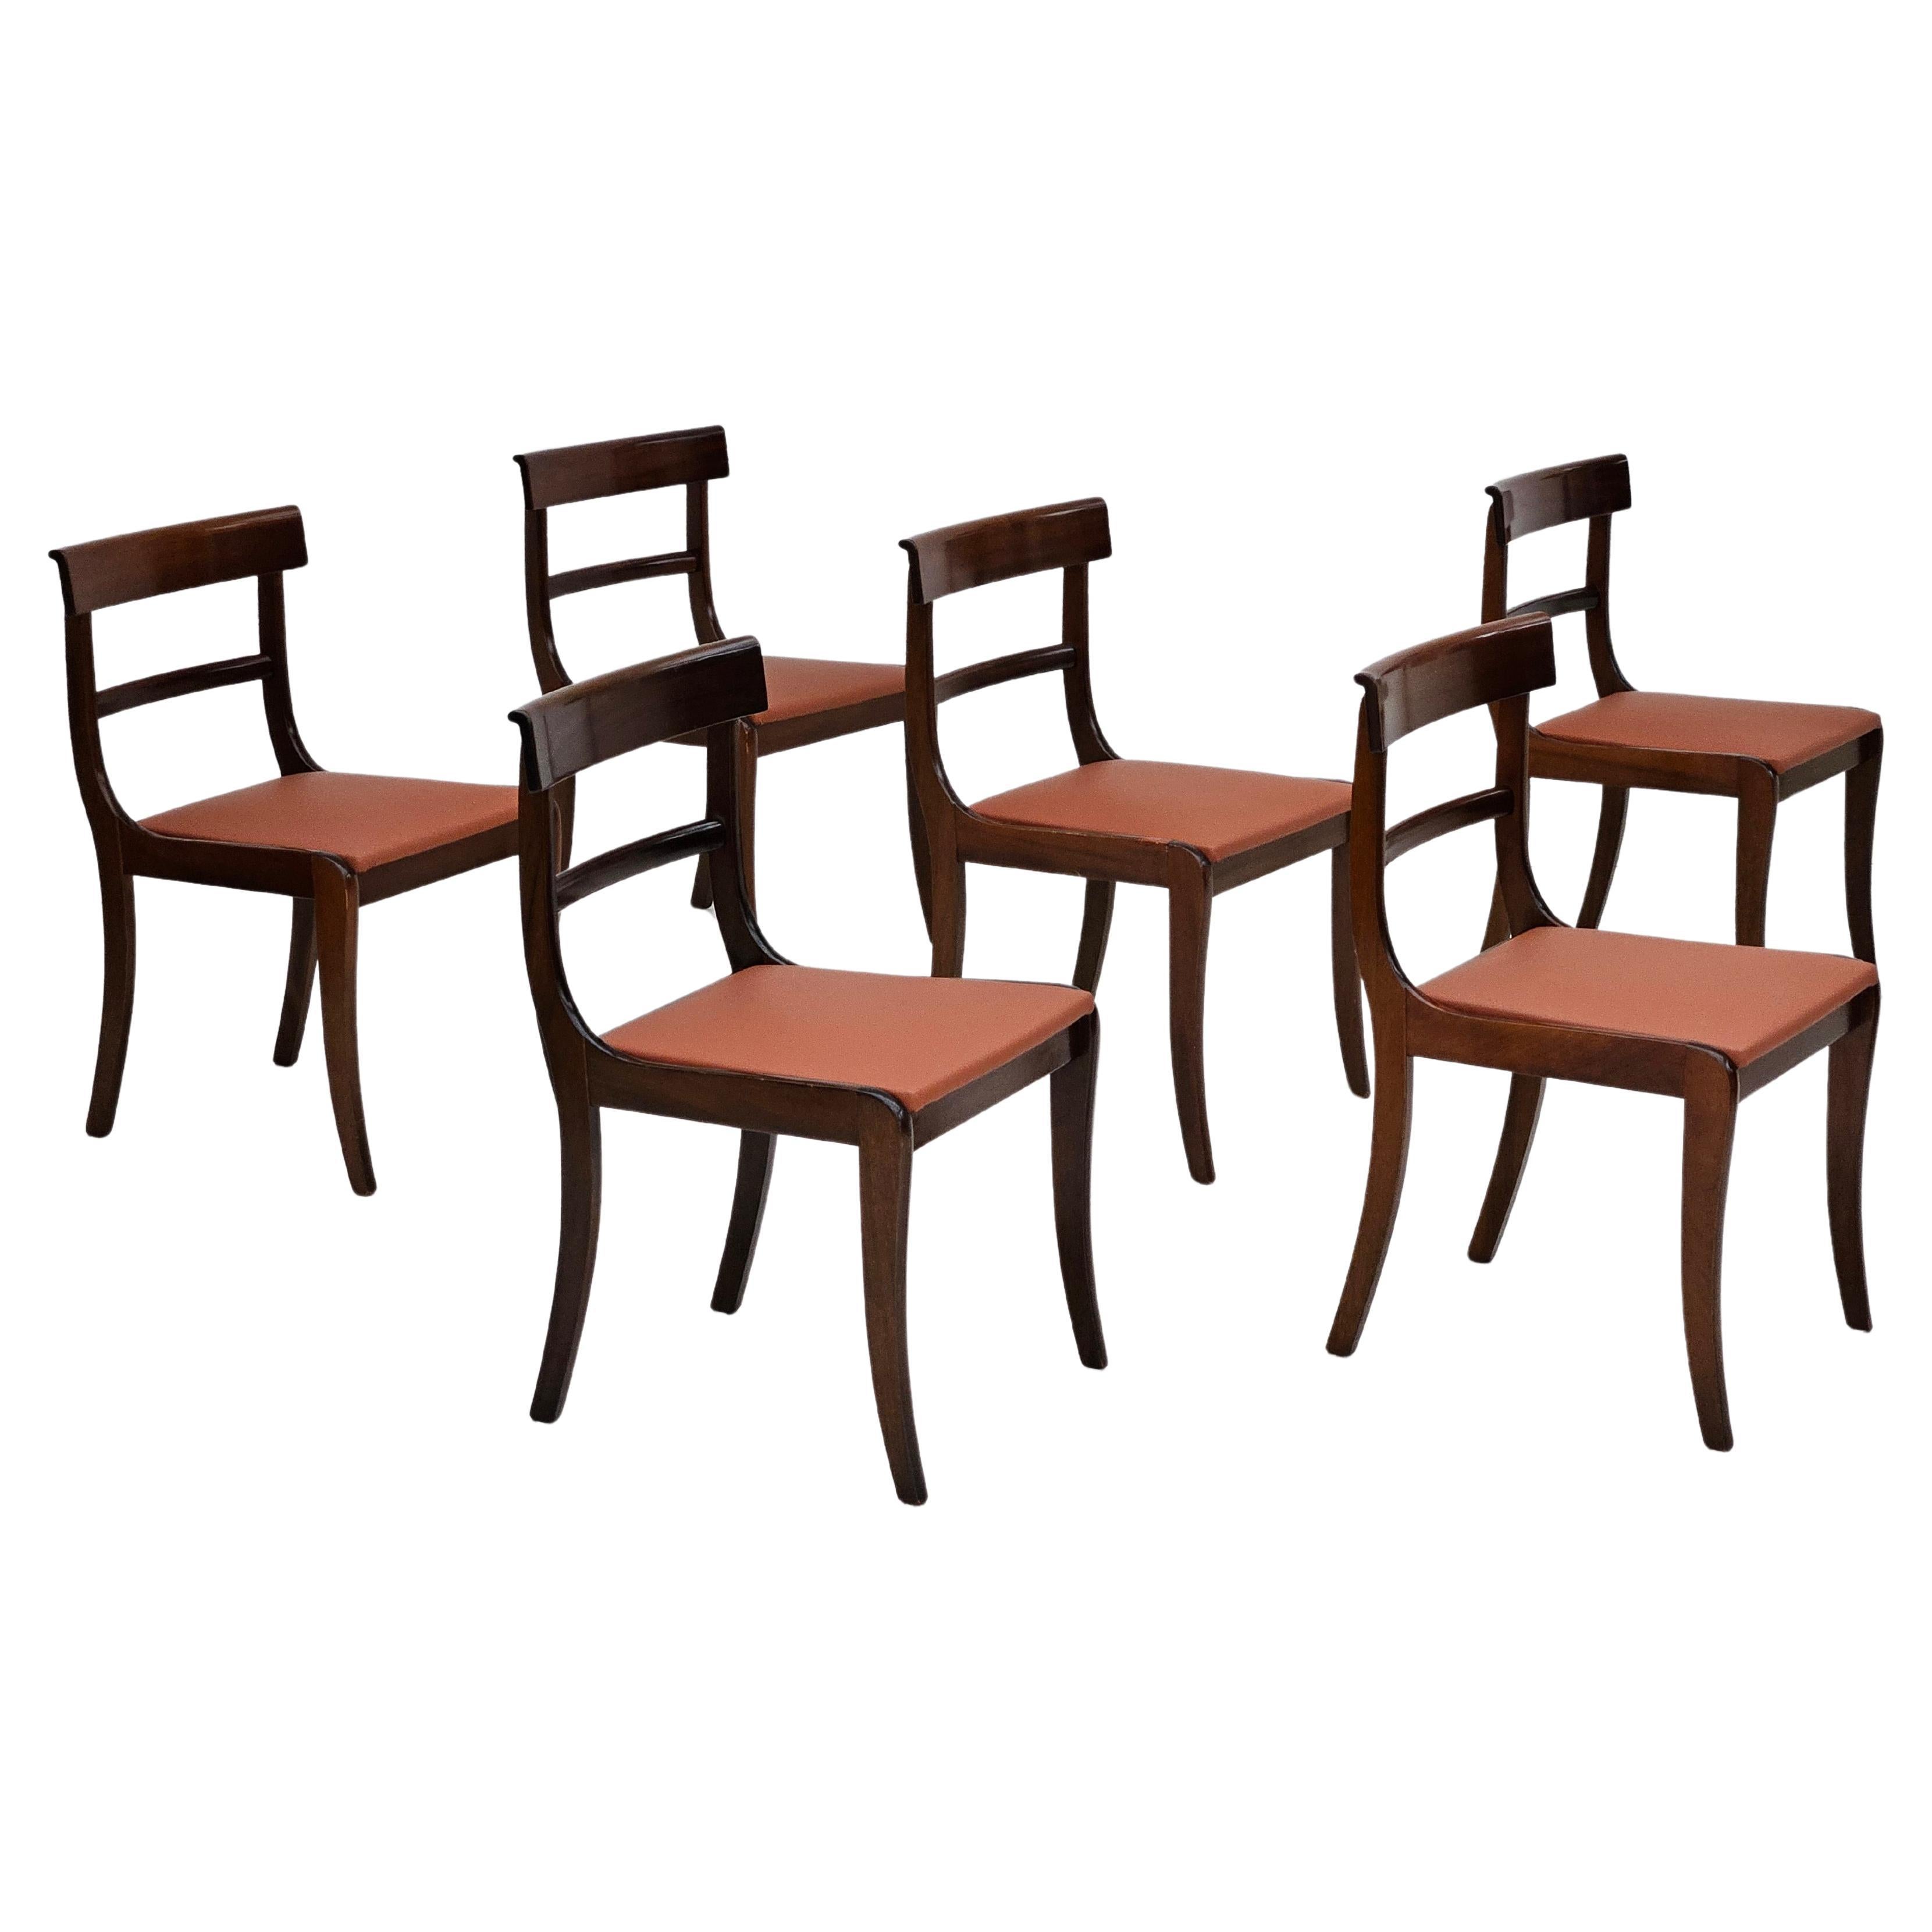 1970s, reupholstered set of 6 pcs Danish dining chairs, teak wood, leather. For Sale